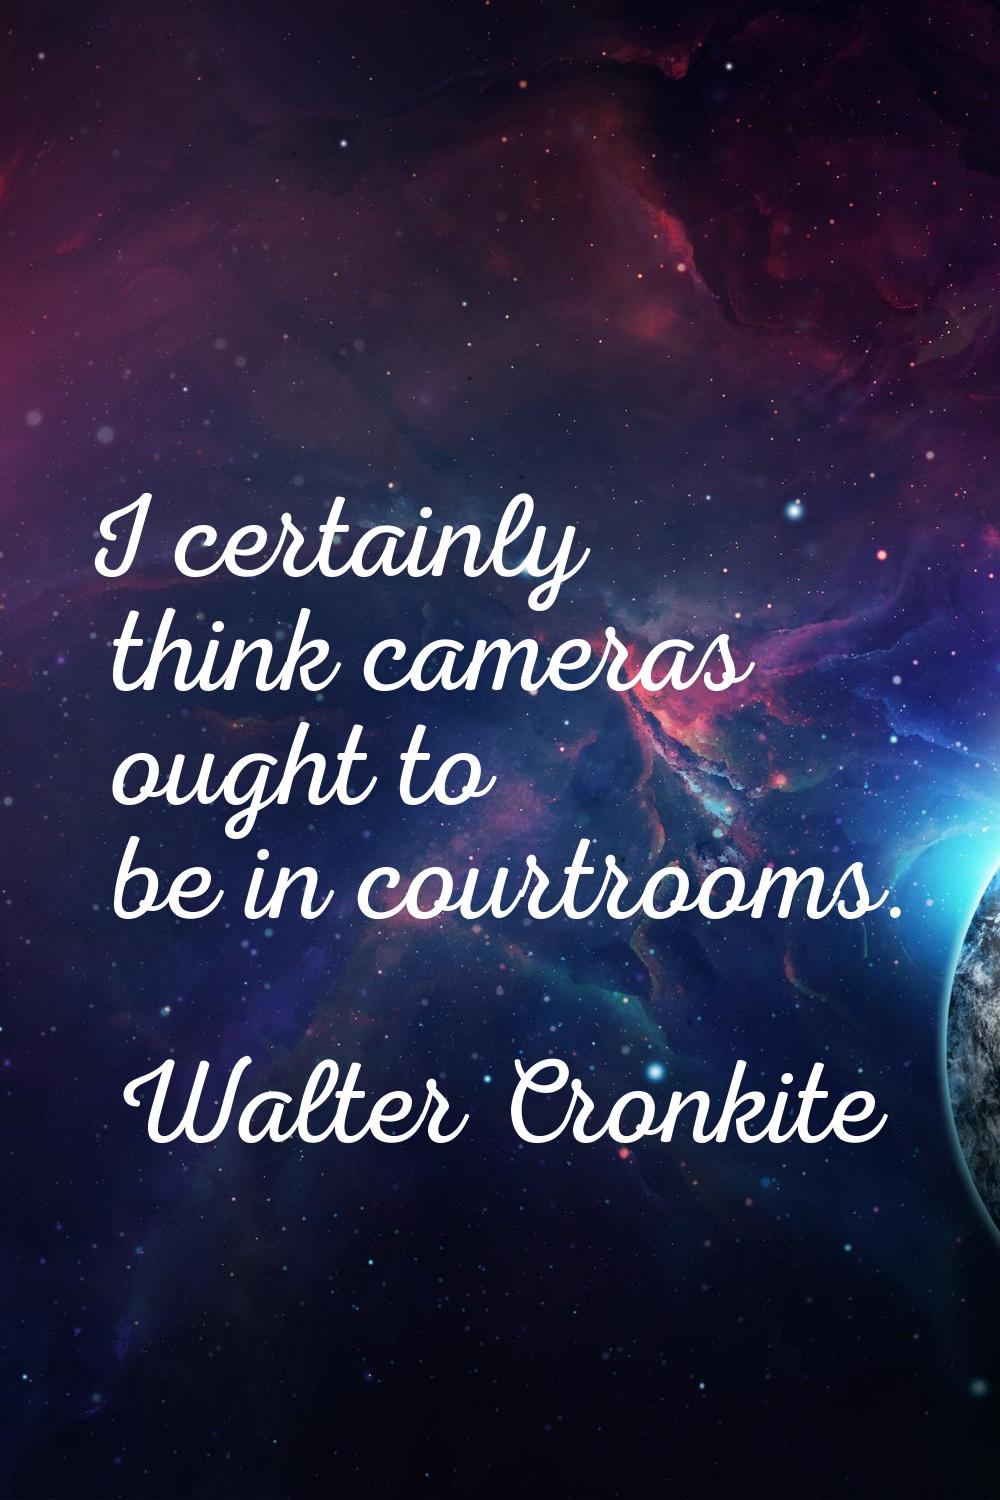 I certainly think cameras ought to be in courtrooms.